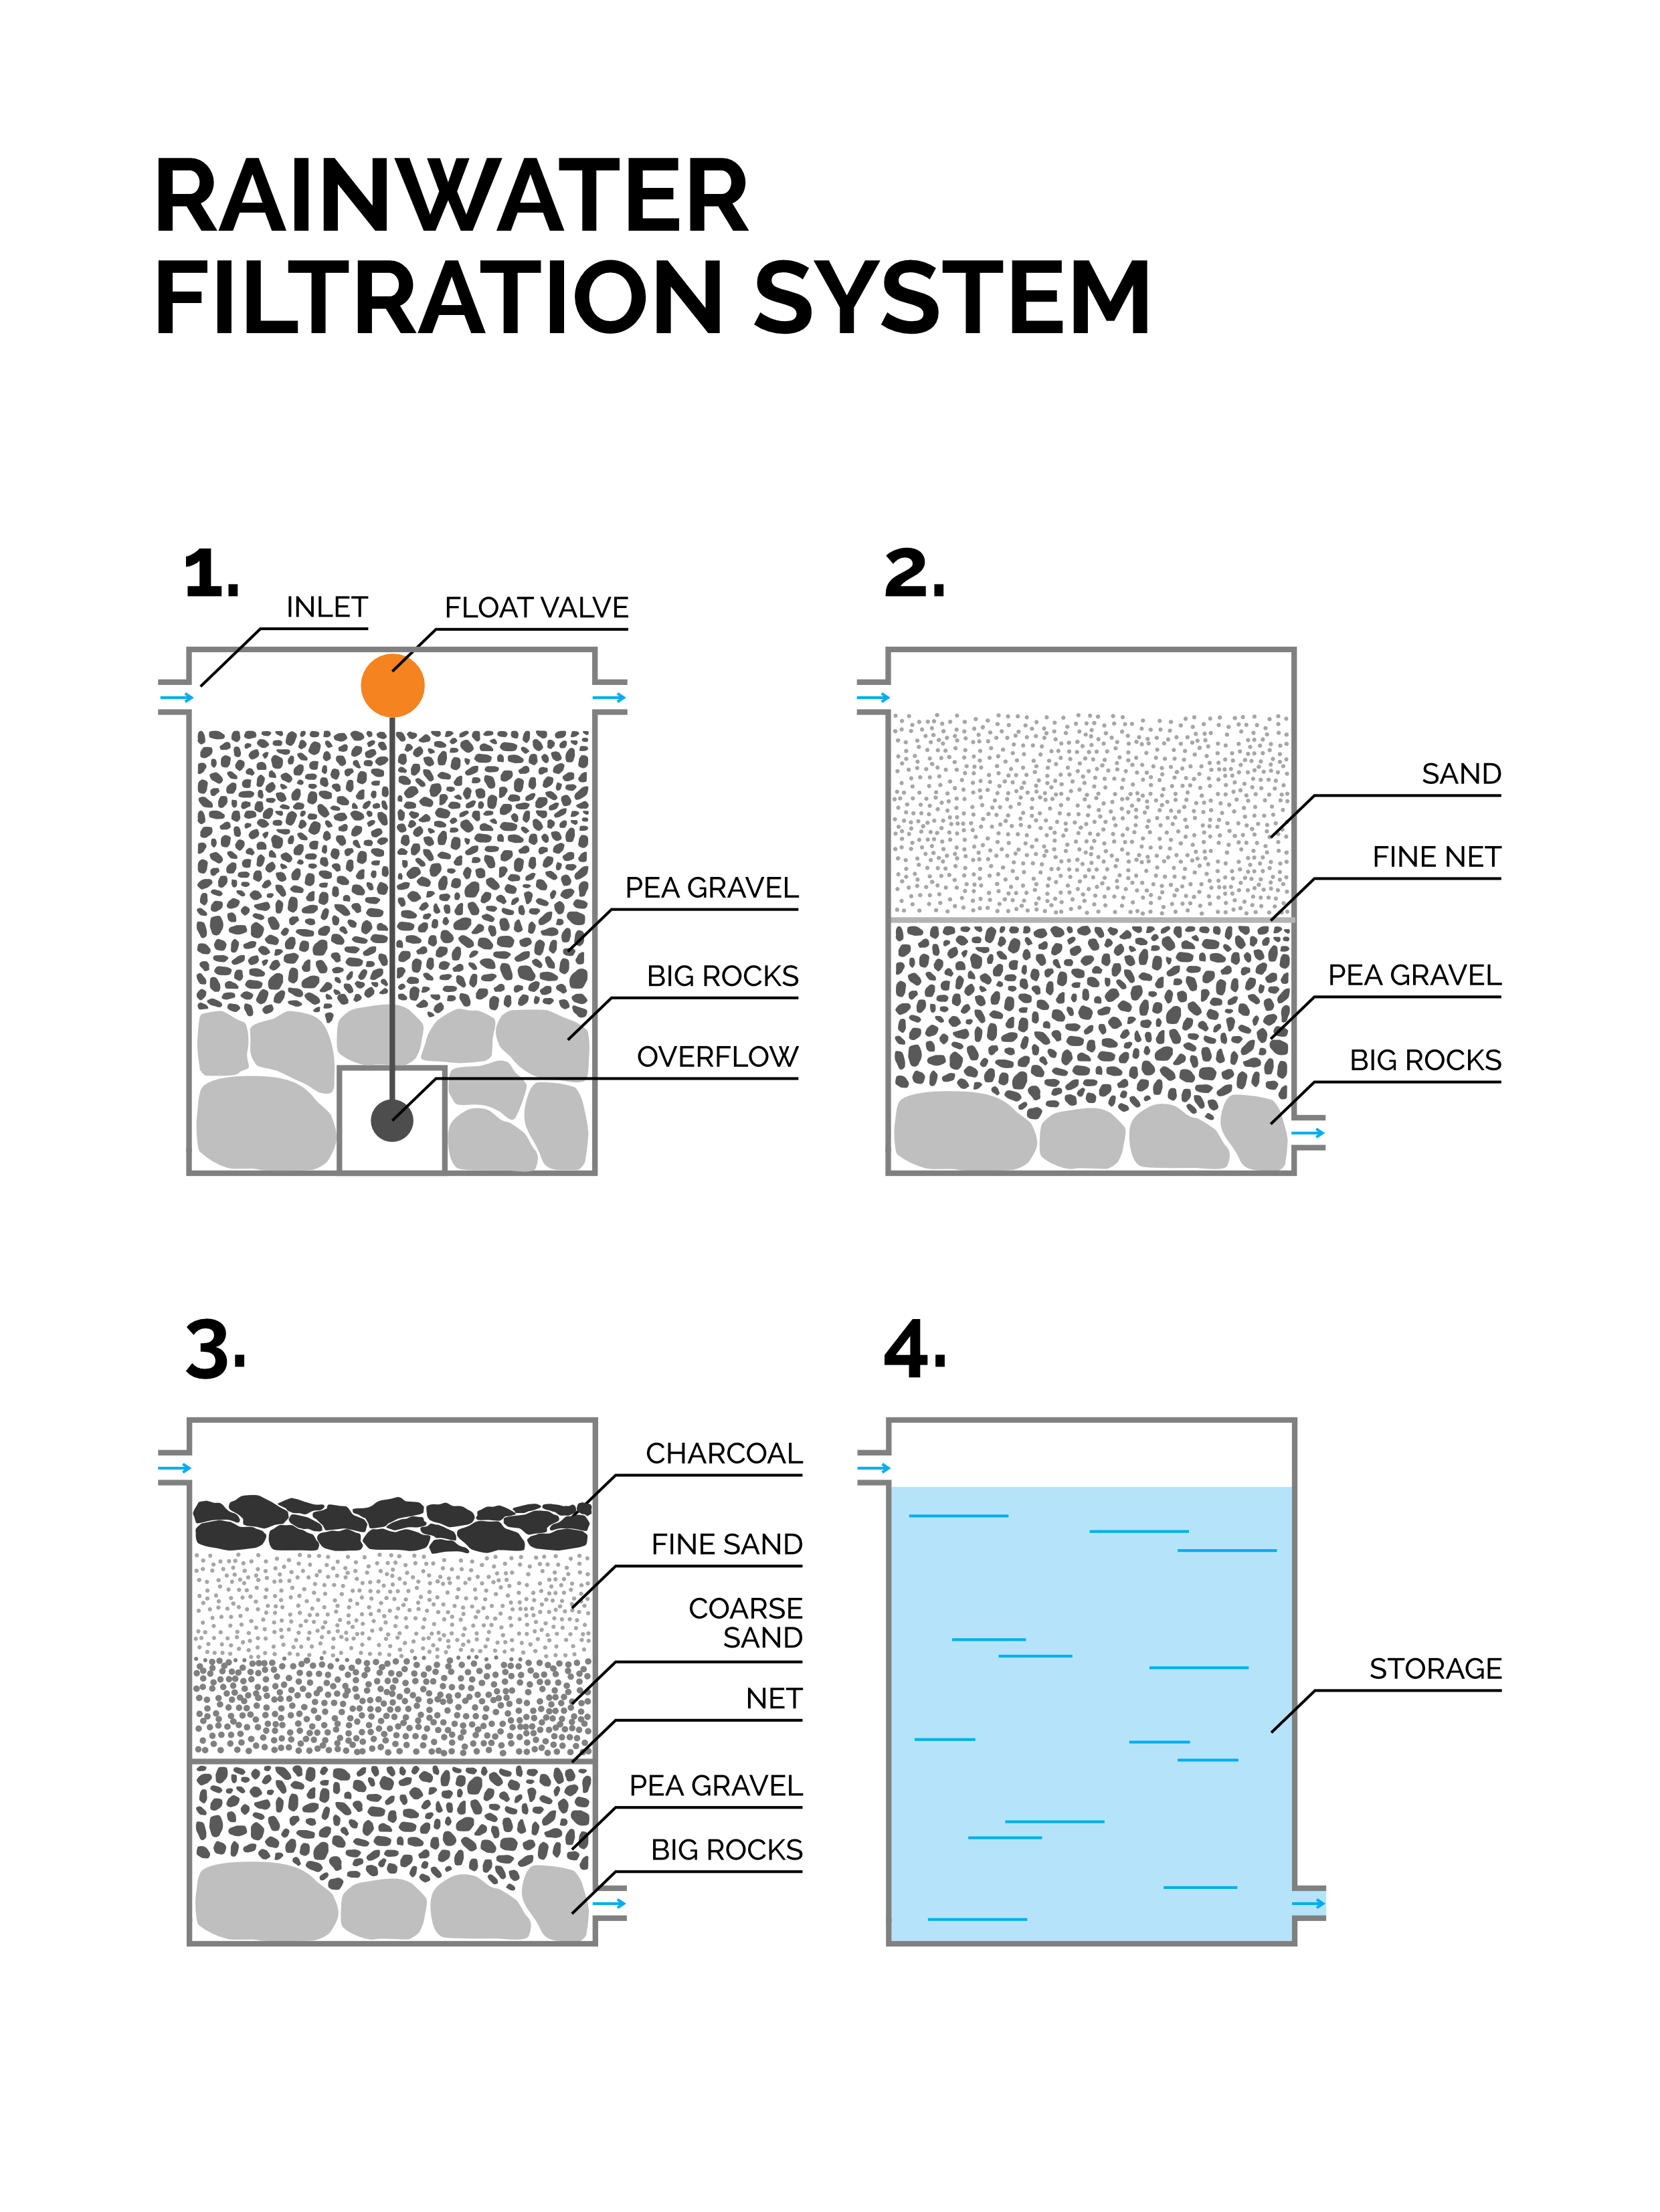 This picture shows the different barrels of a rainwater filtration system.